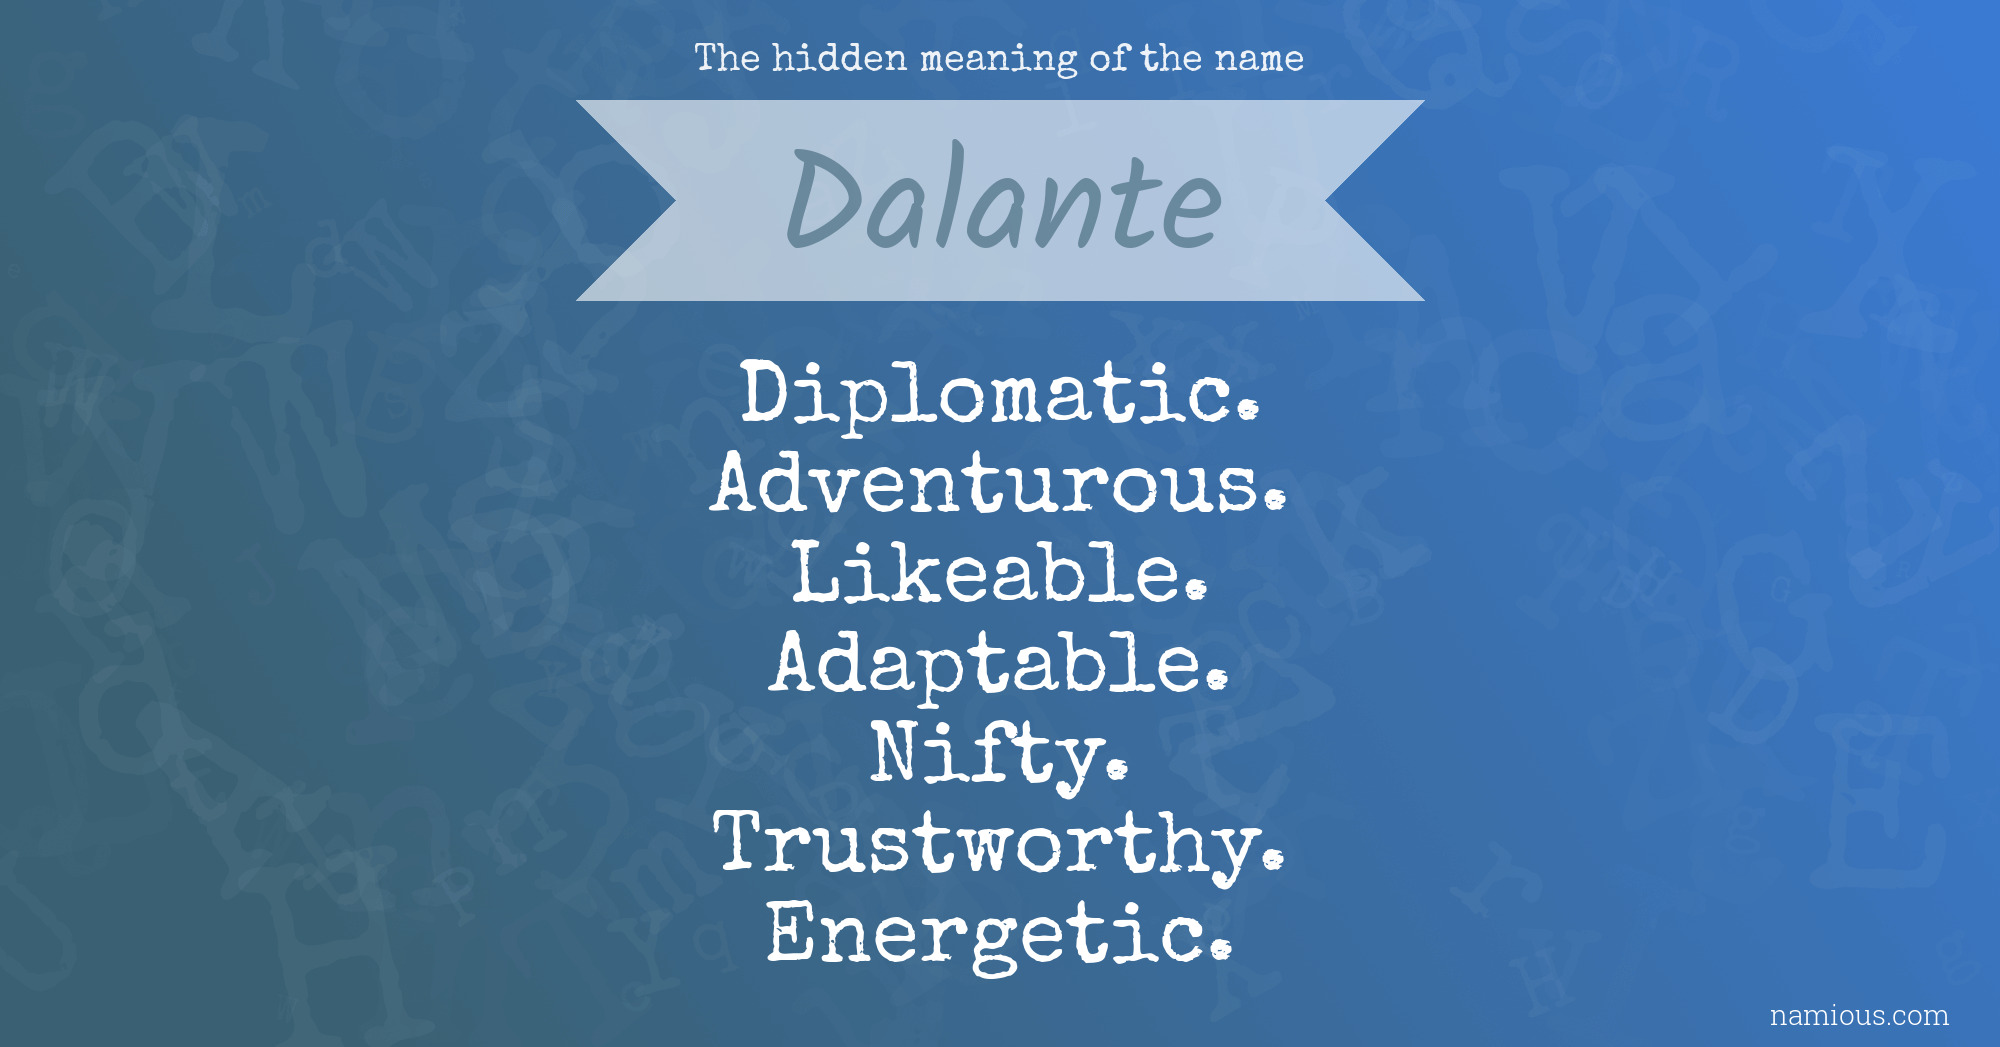 The hidden meaning of the name Dalante